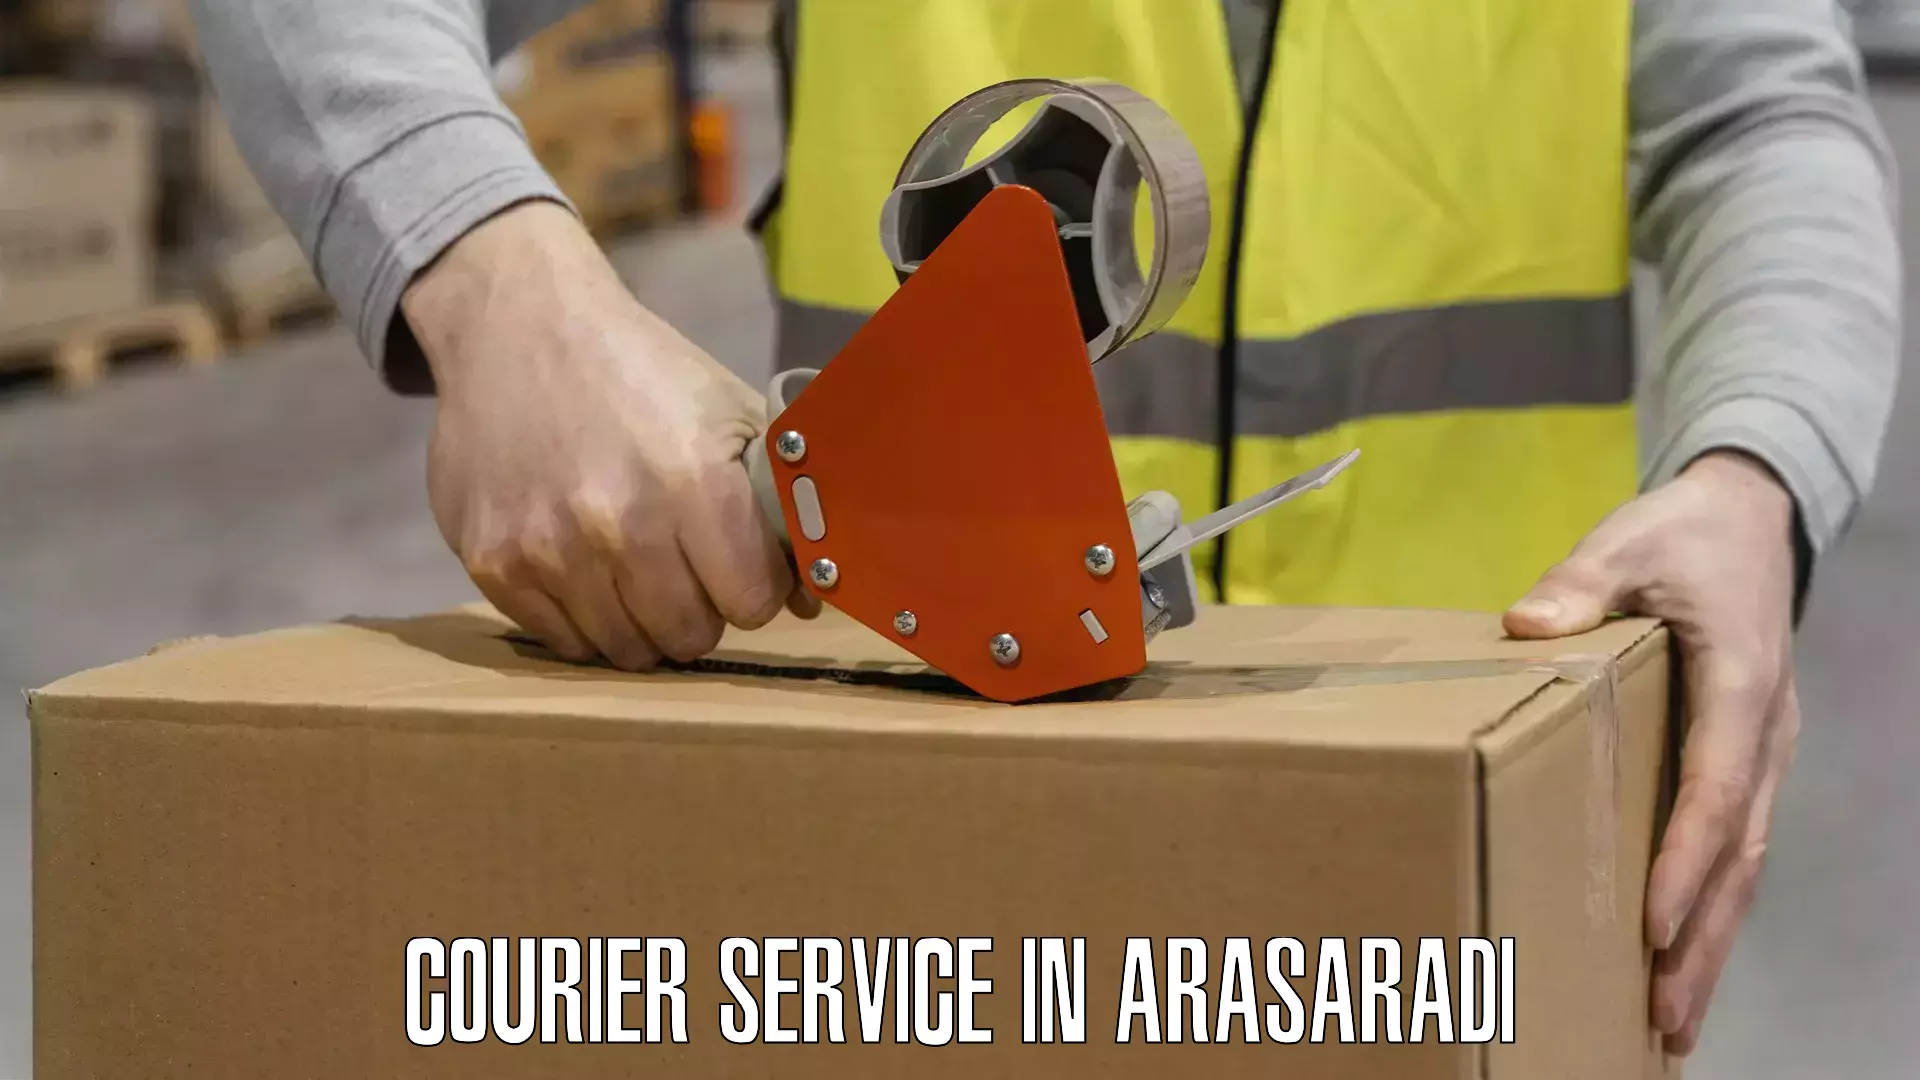 Comprehensive freight services in Arasaradi